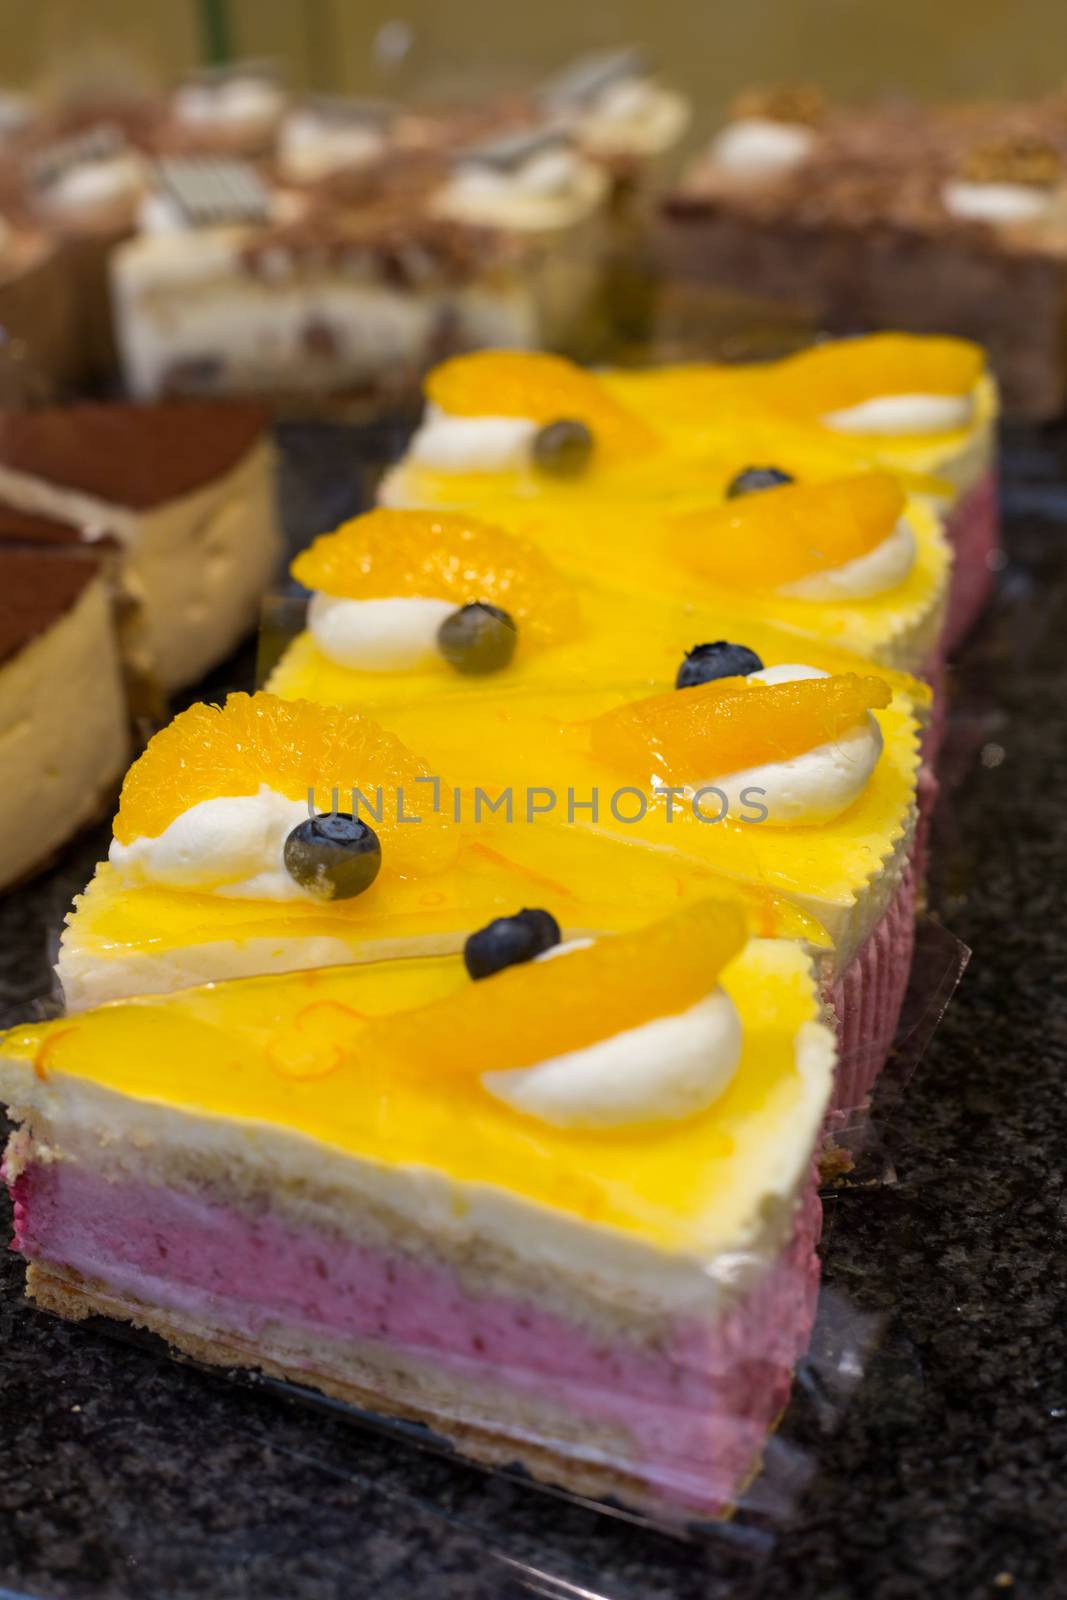 Cake displayed in confectionery or cafe by ikonoklast_fotografie